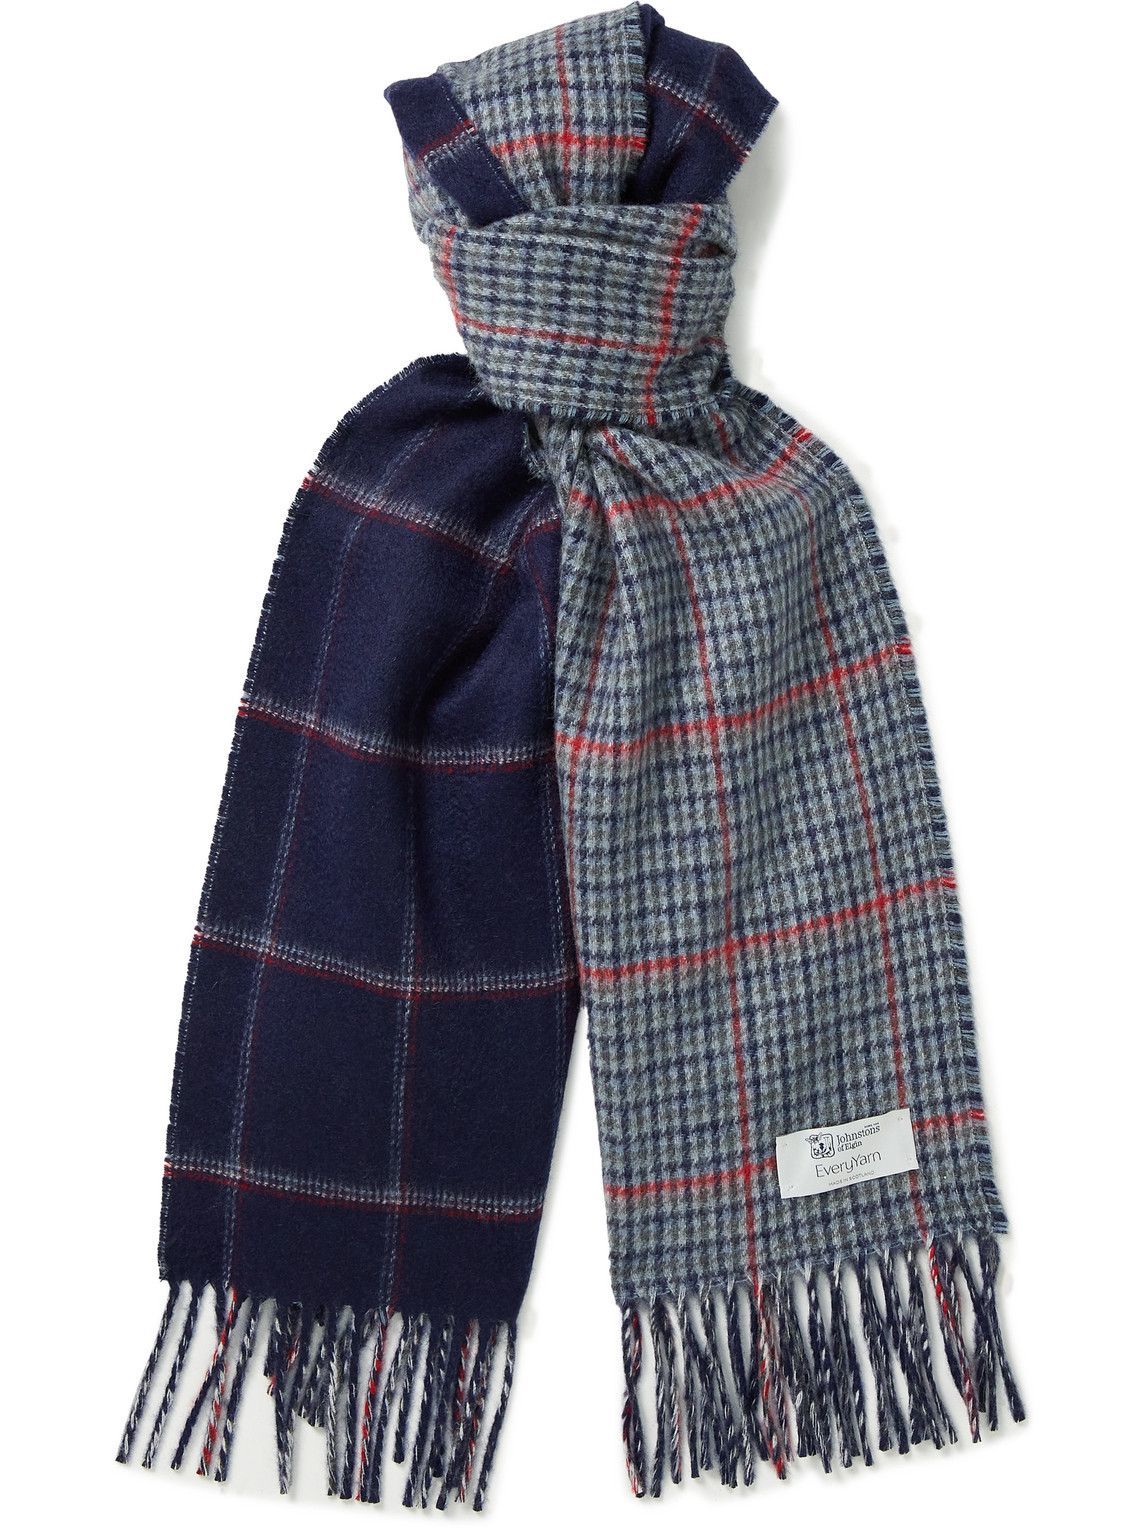 Reversible Pure Cashmere Scarves made in Scotland by Johnstons of Elgin 